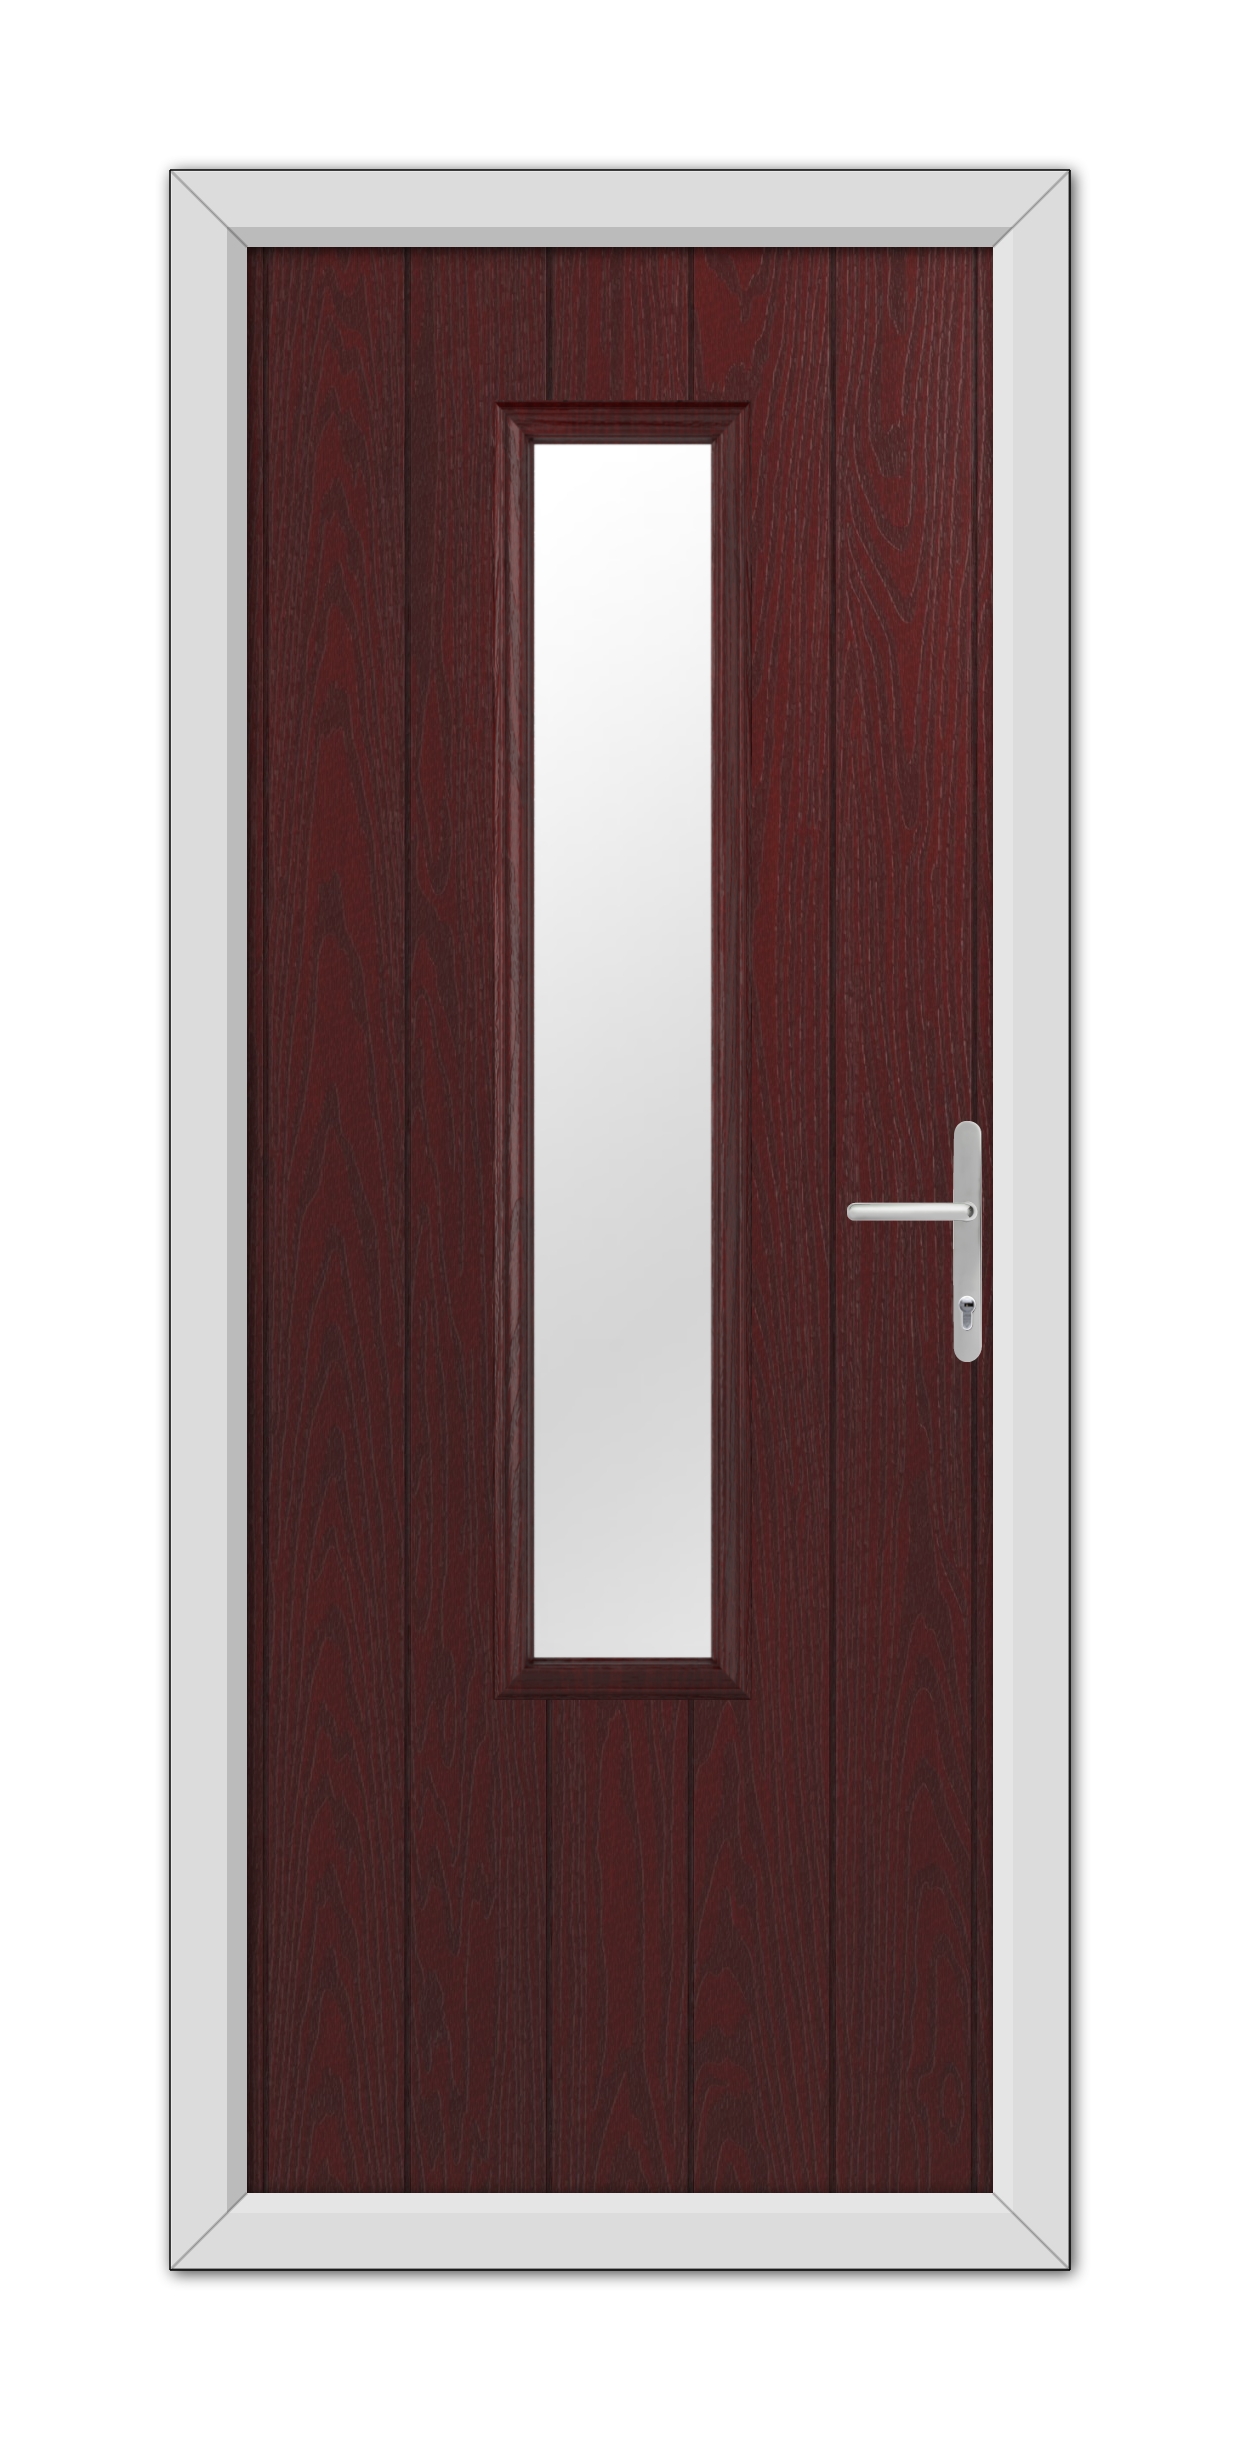 A modern Rosewood Abercorn Composite Door 48mm Timber Core with a vertical rectangular glass panel and a silver handle, set within a white frame.